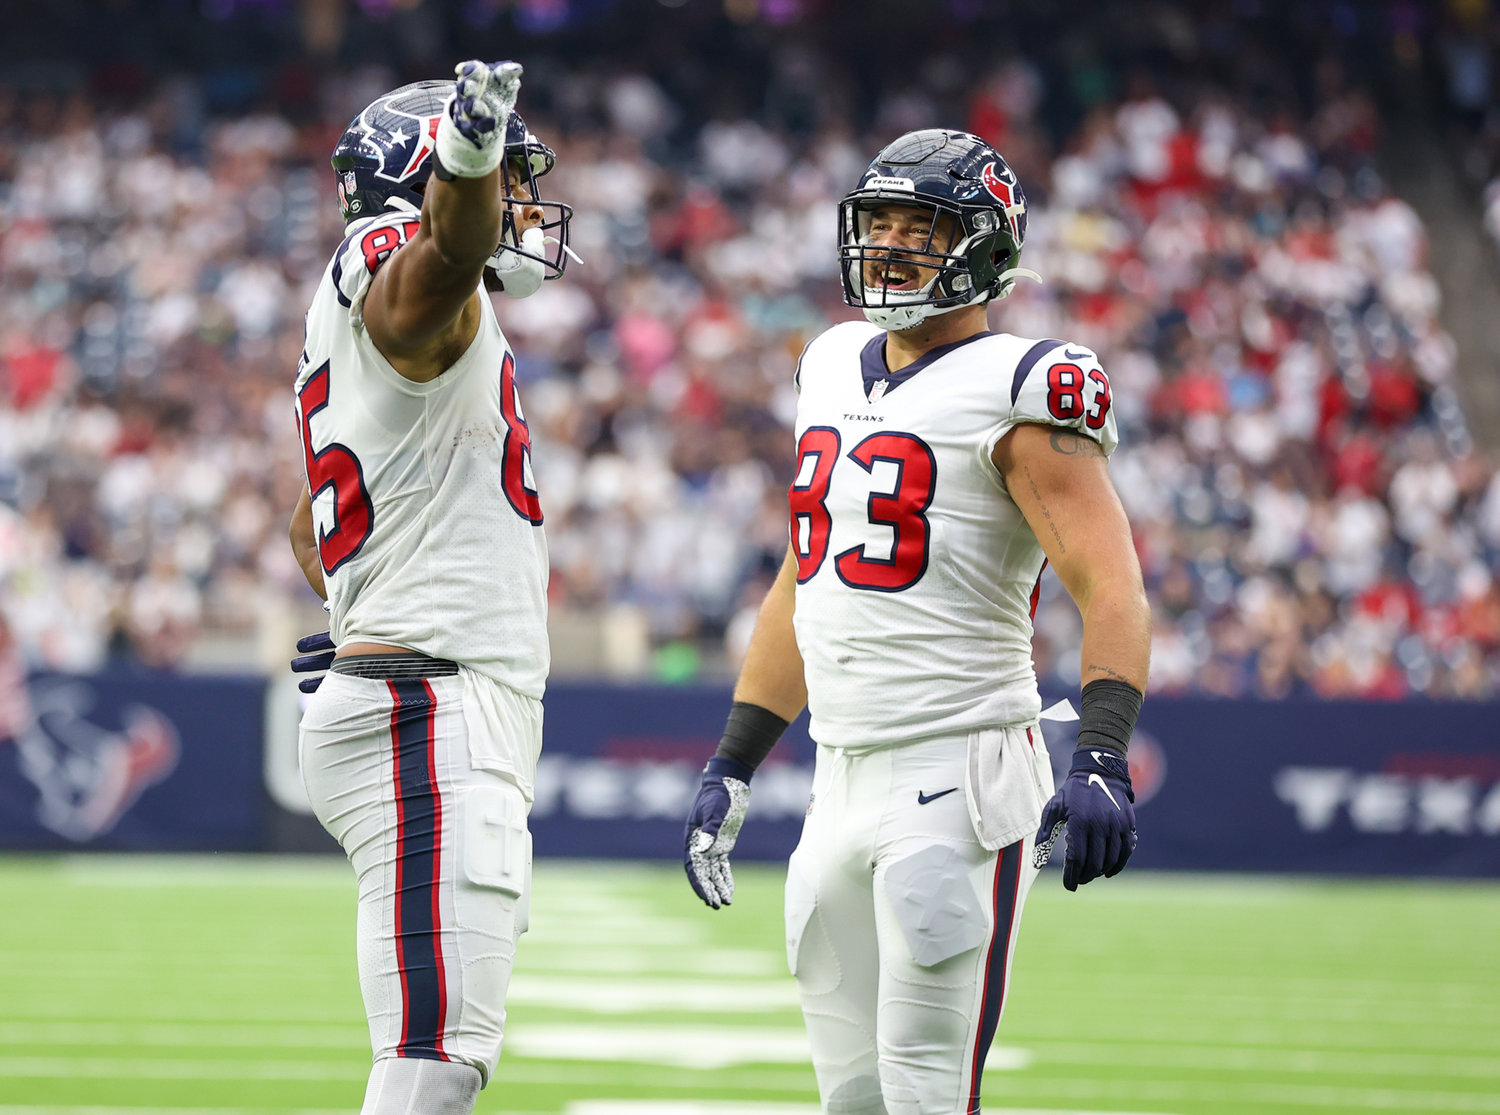 Houston Texans tight end Pharaoh Brown (85) gestures after picking up a first down as tight end Antony Auclair (83) looks on during the second half of an NFL game between the Houston Texans and the Jacksonville Jaguars on September 12, 2021 in Houston, Texas.